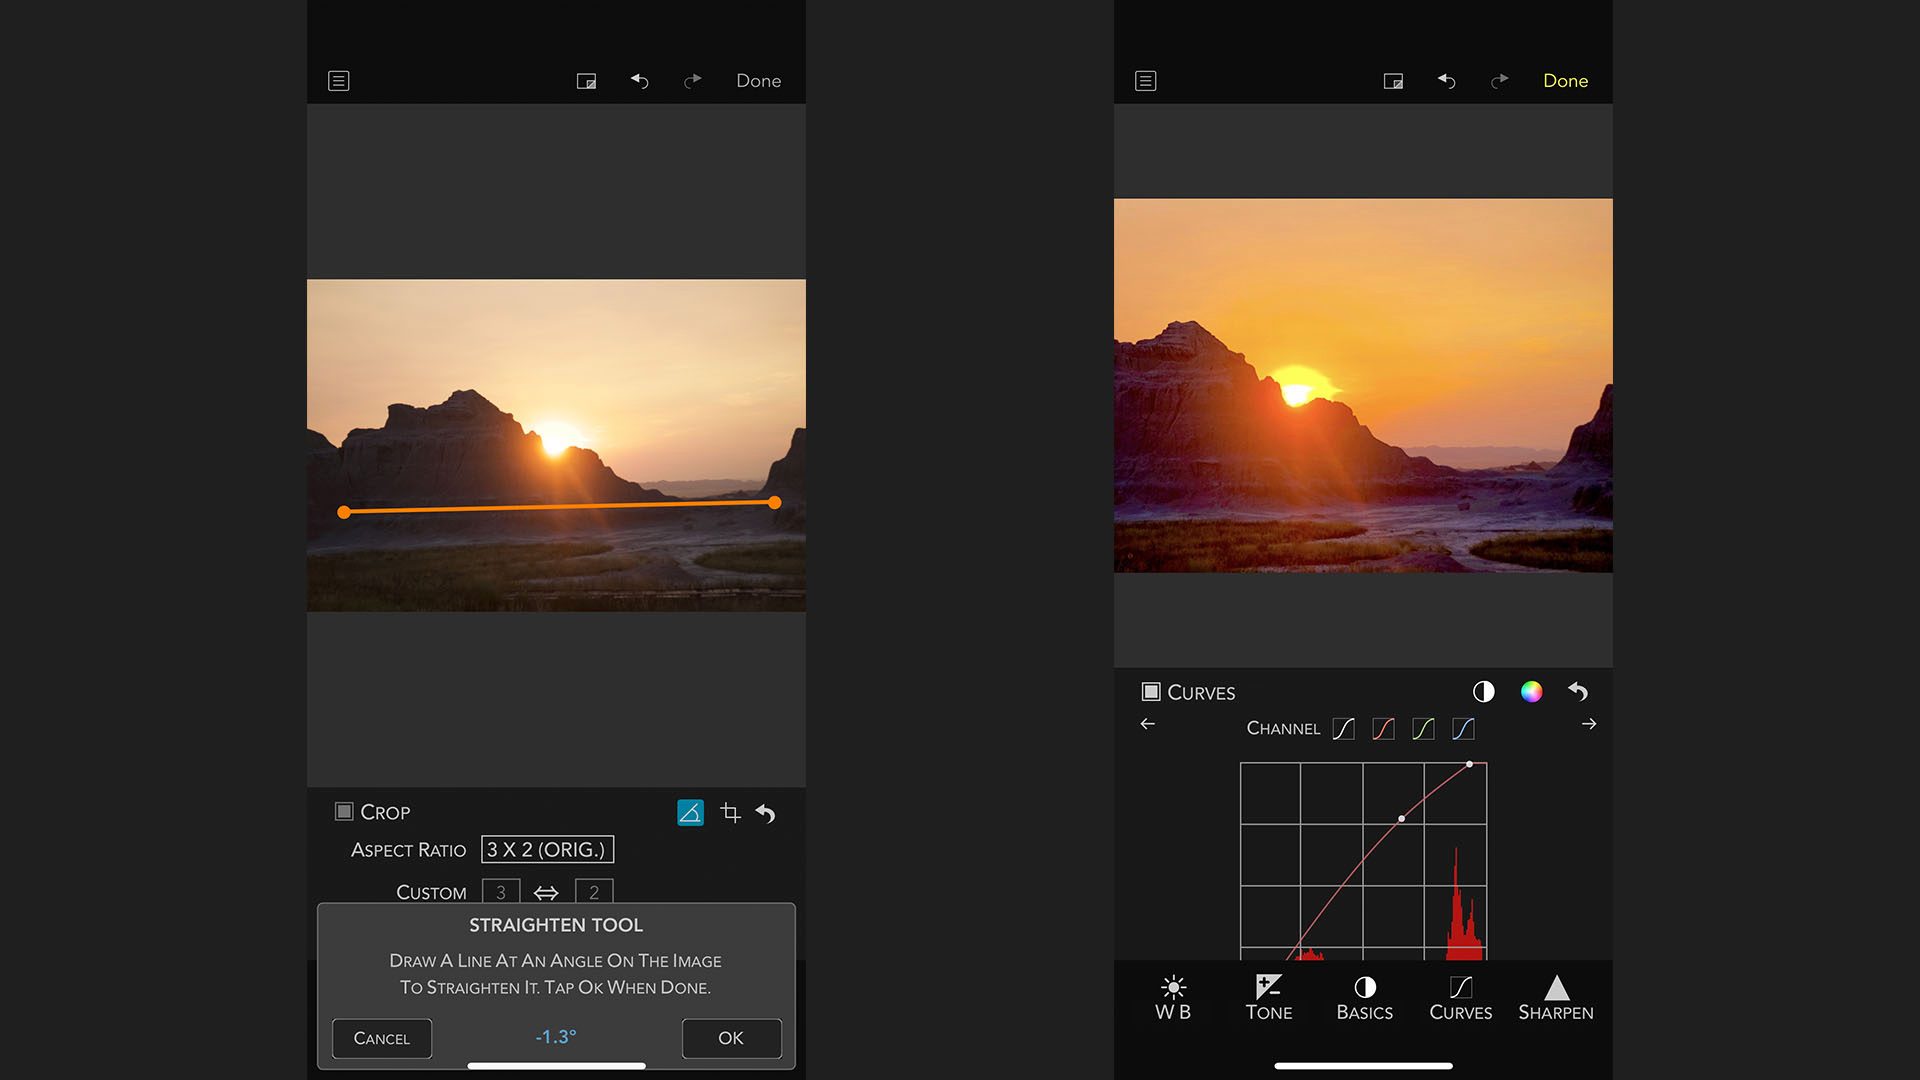 Former Apple Engineering Director Launches RAW Power Photo Editor for iOS